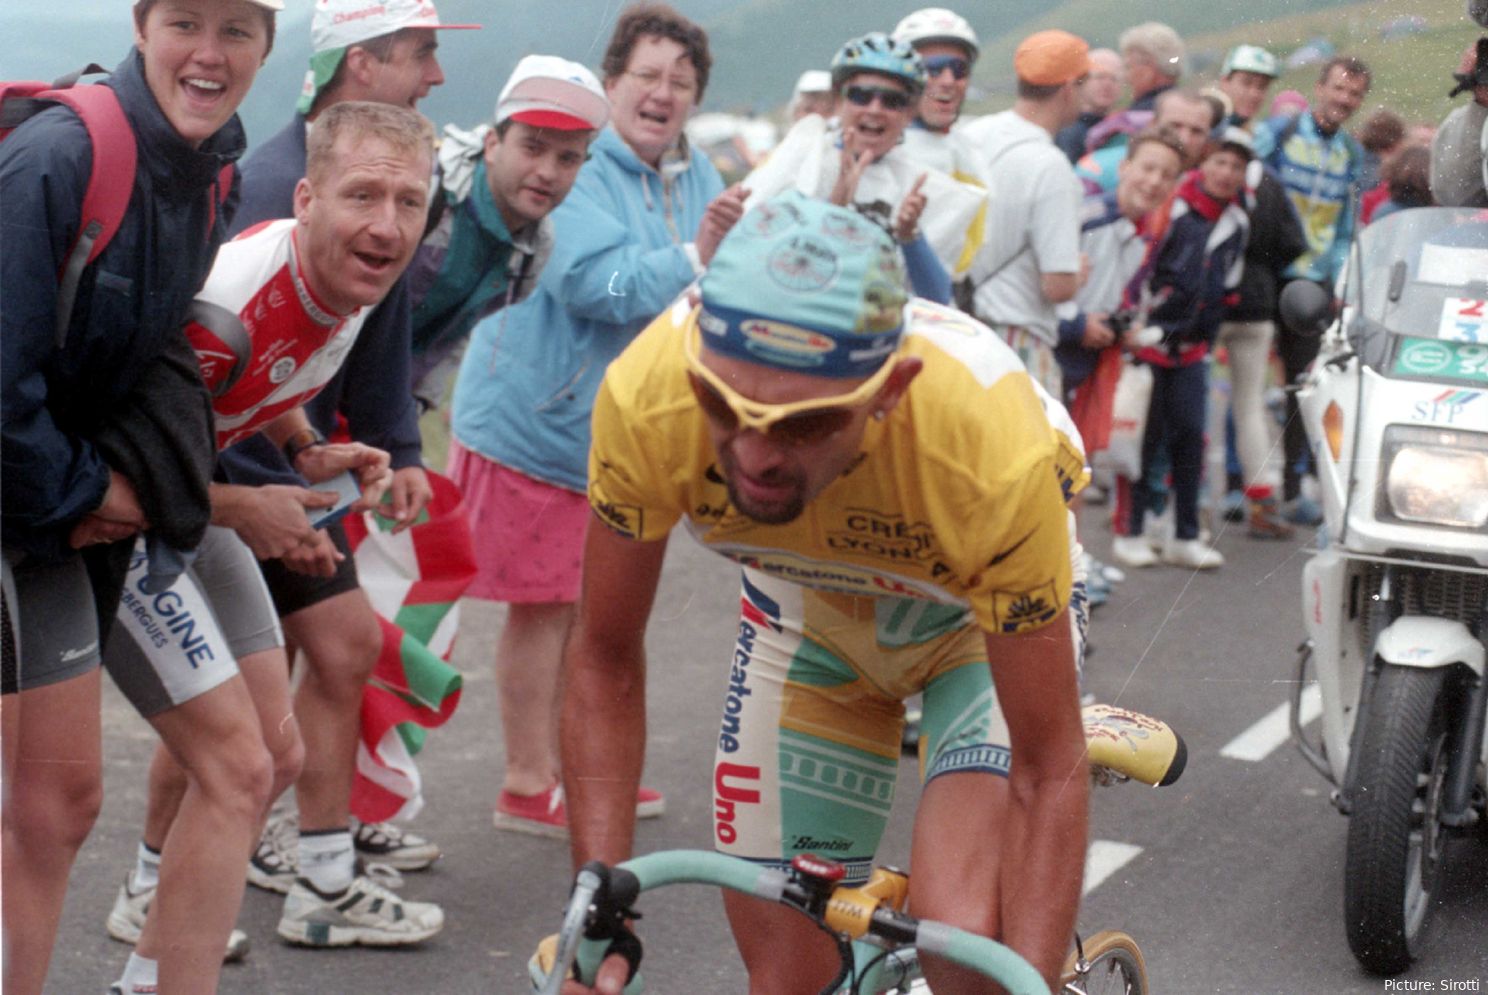 20 years without Marco Pantani - The best climber in cycling history